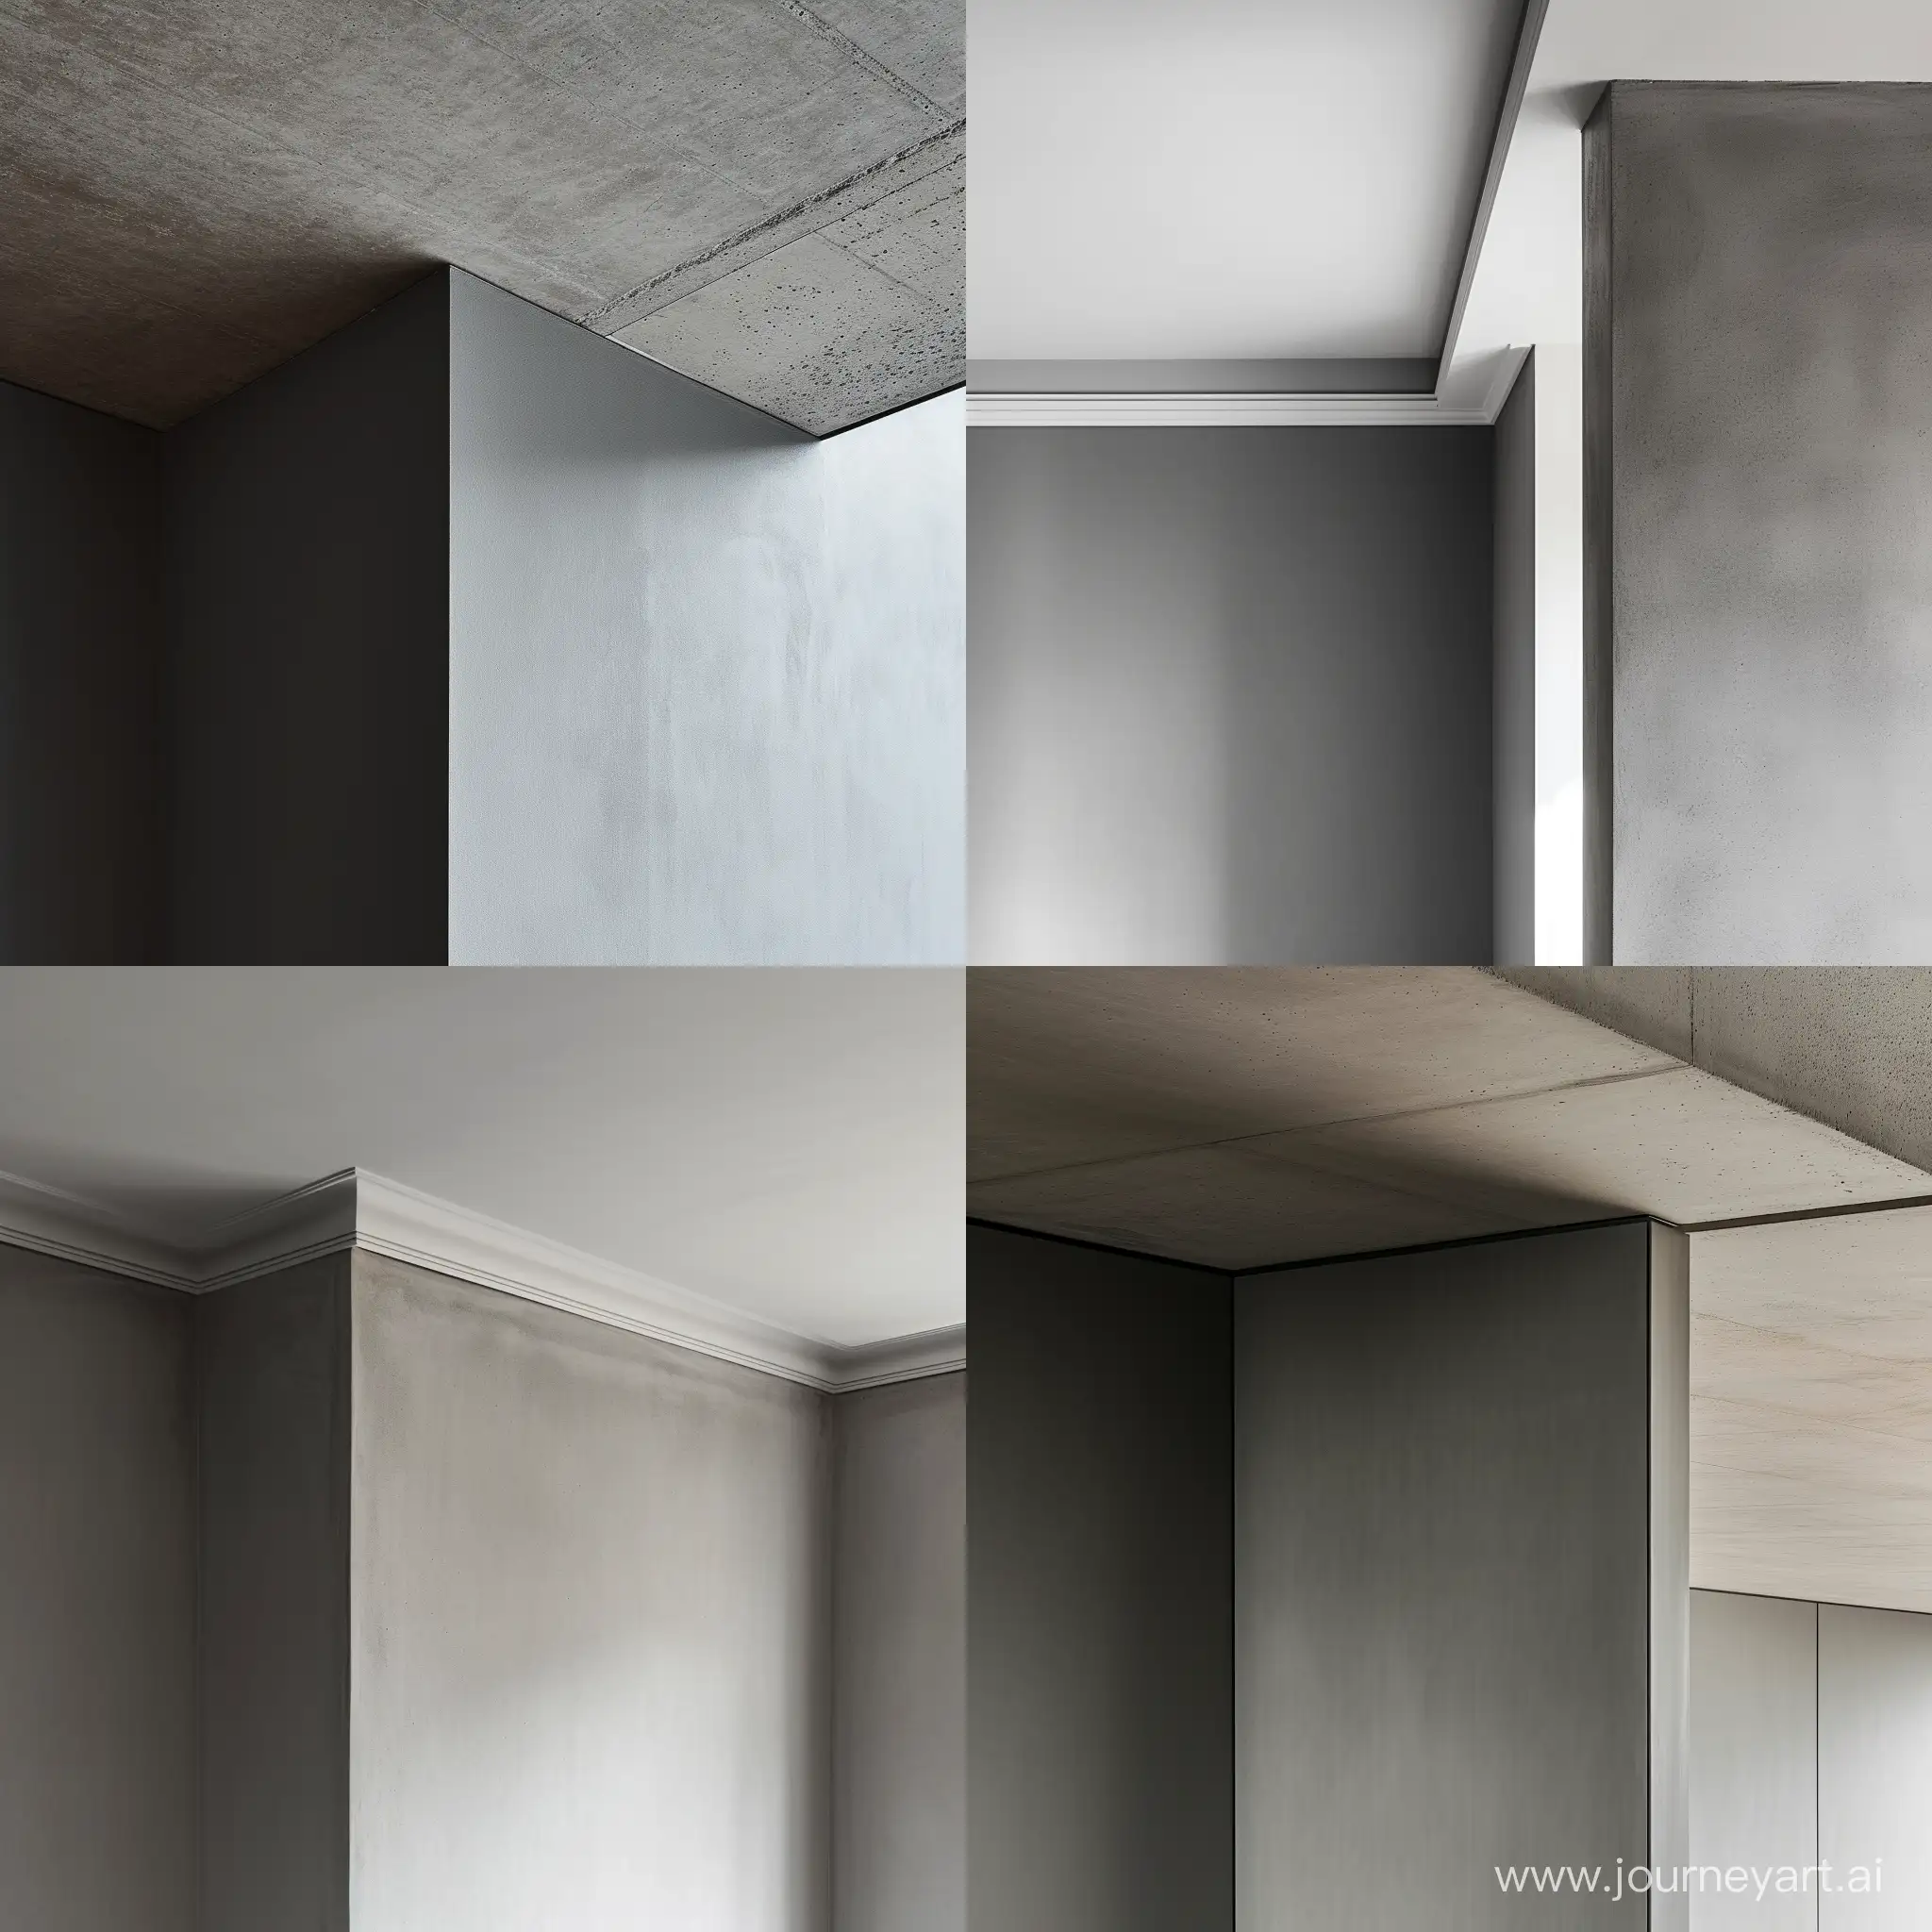 The image of the corner of a room with a gray wall and the ceiling visible completely